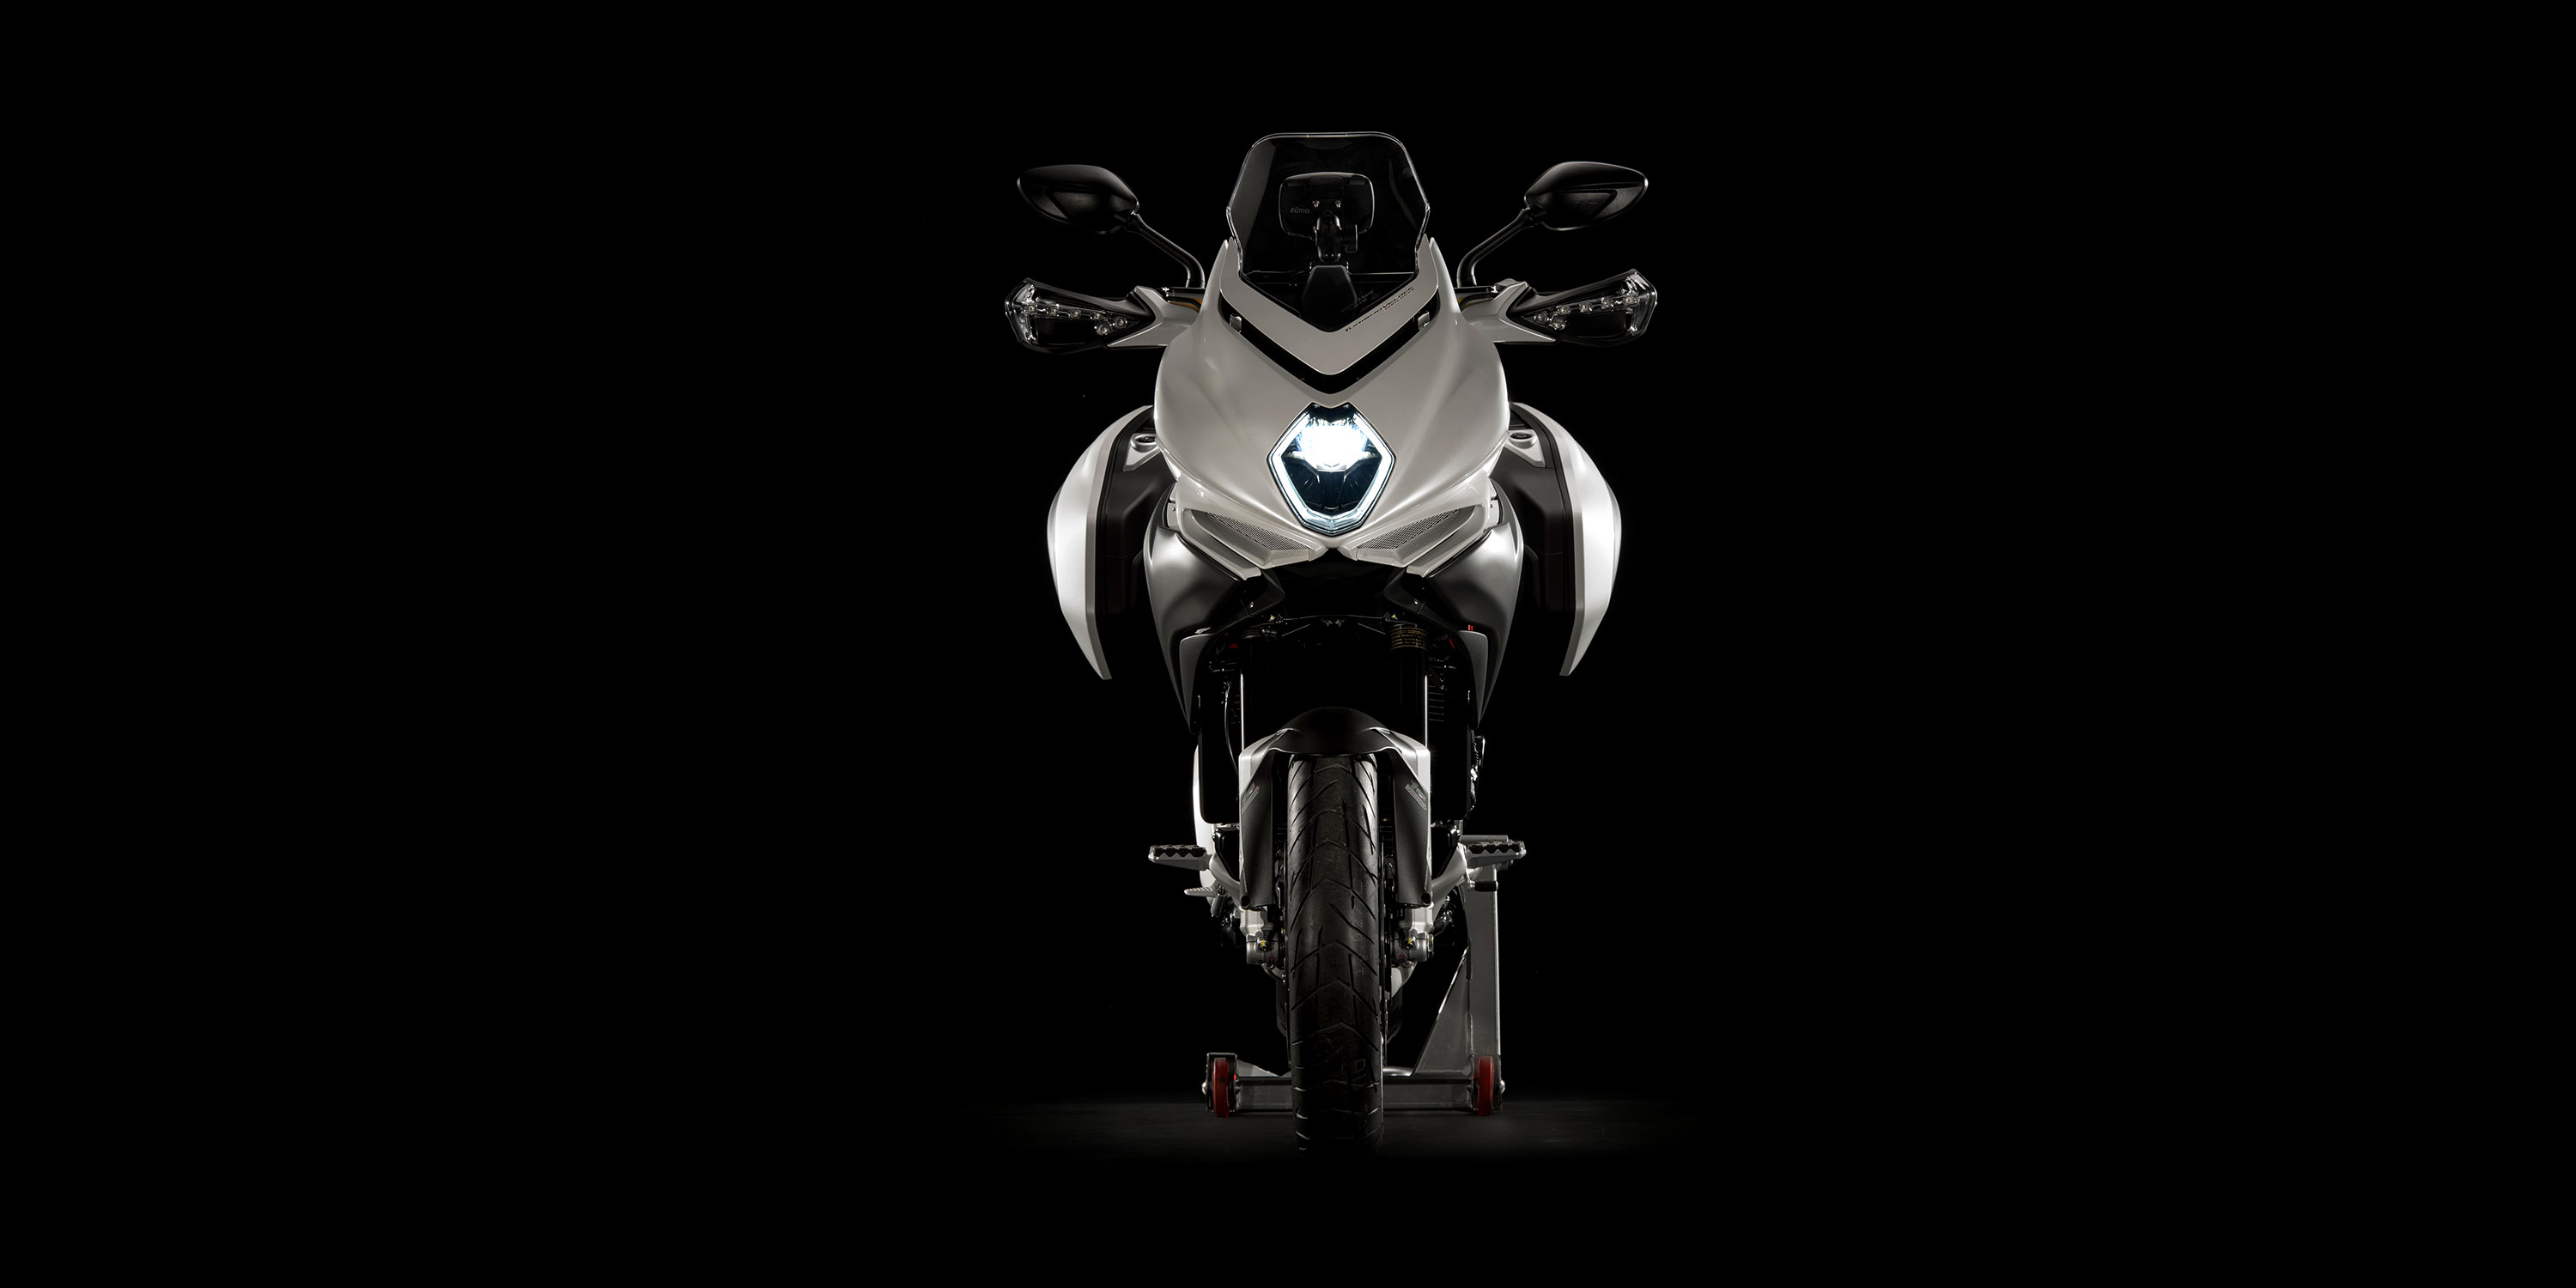 MV Agusta Turismo Veloce 800 Lusso front view